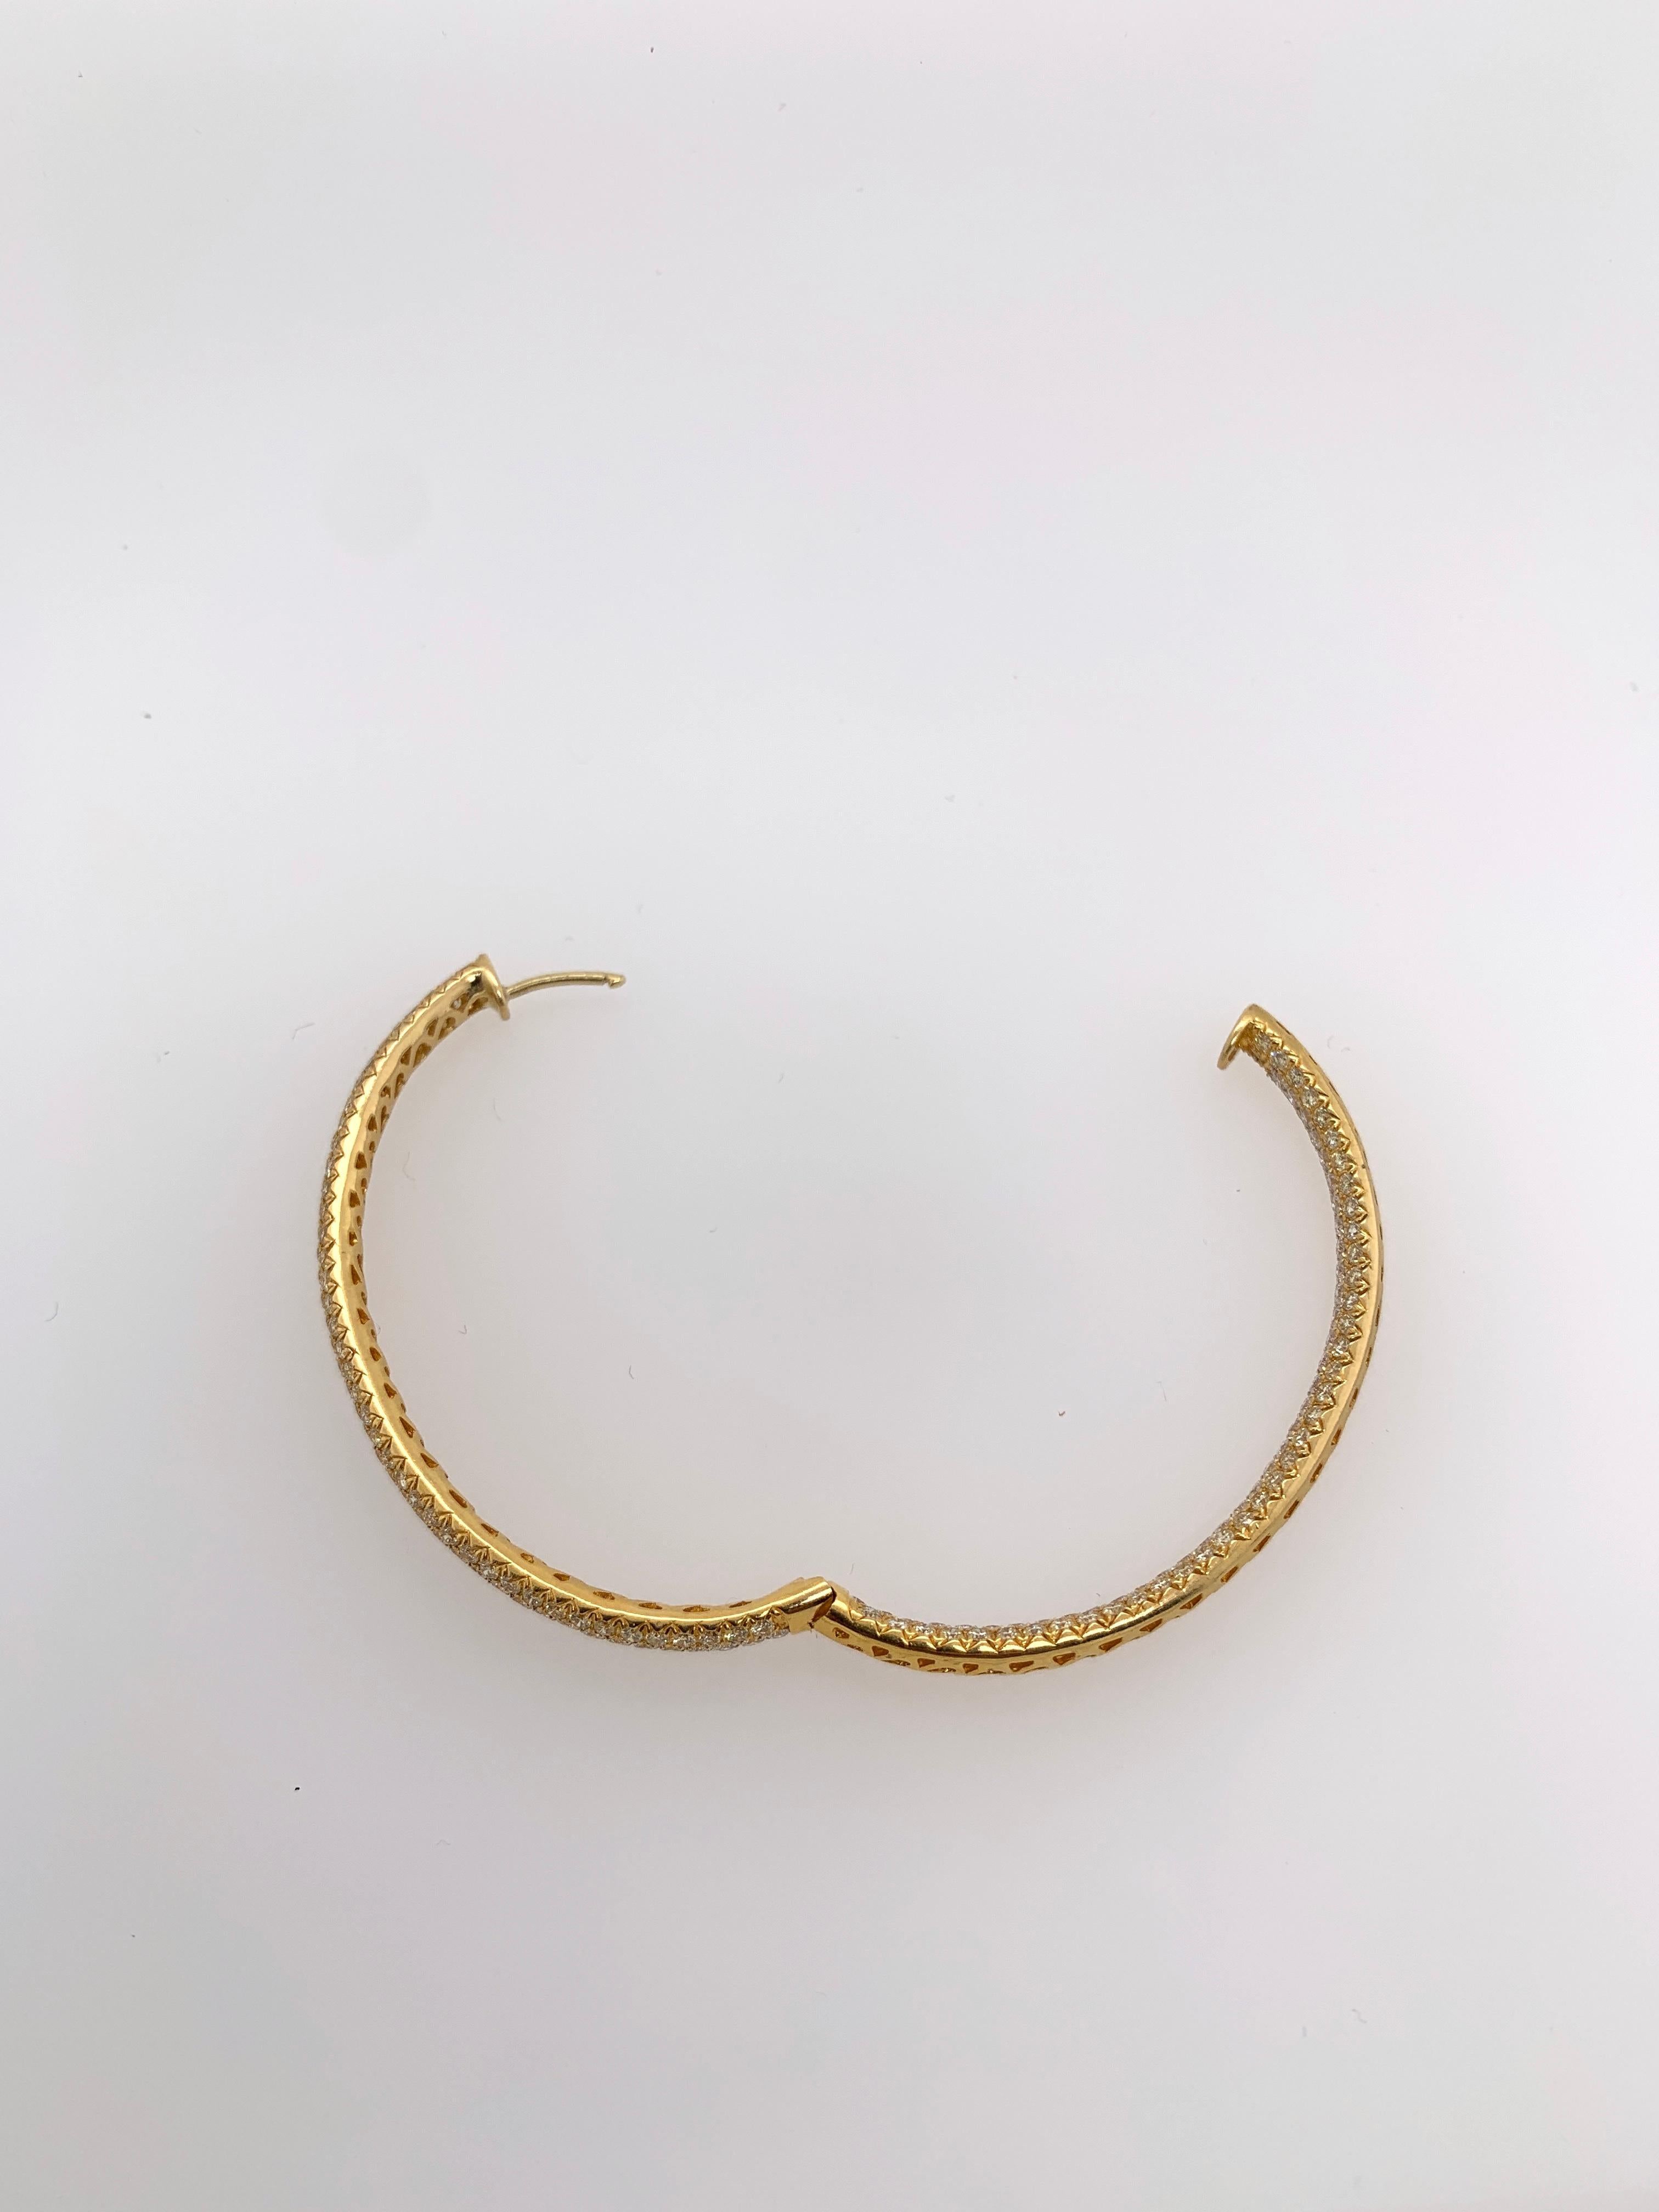 The Diamond Oval Hoop Earrings
White Diamonds set on Yellow Gold.
Crafted to order. Please allow up to 3 weeks for delivery.